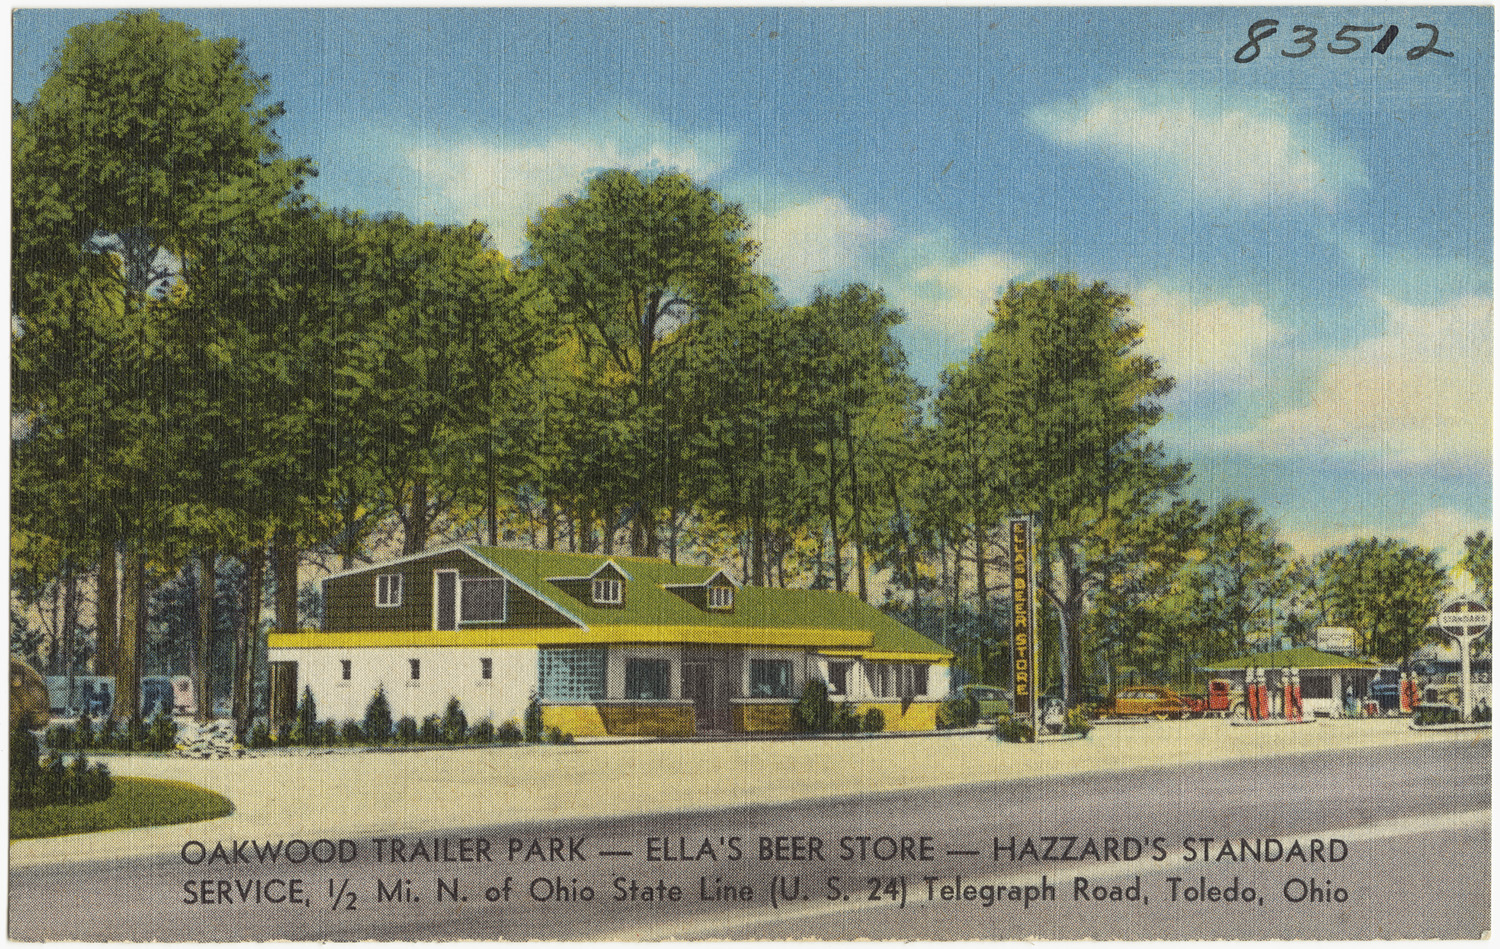 a postcard from the early 1900's depicts a covered restaurant with yellow roof and a large sign over it, and lots of trees